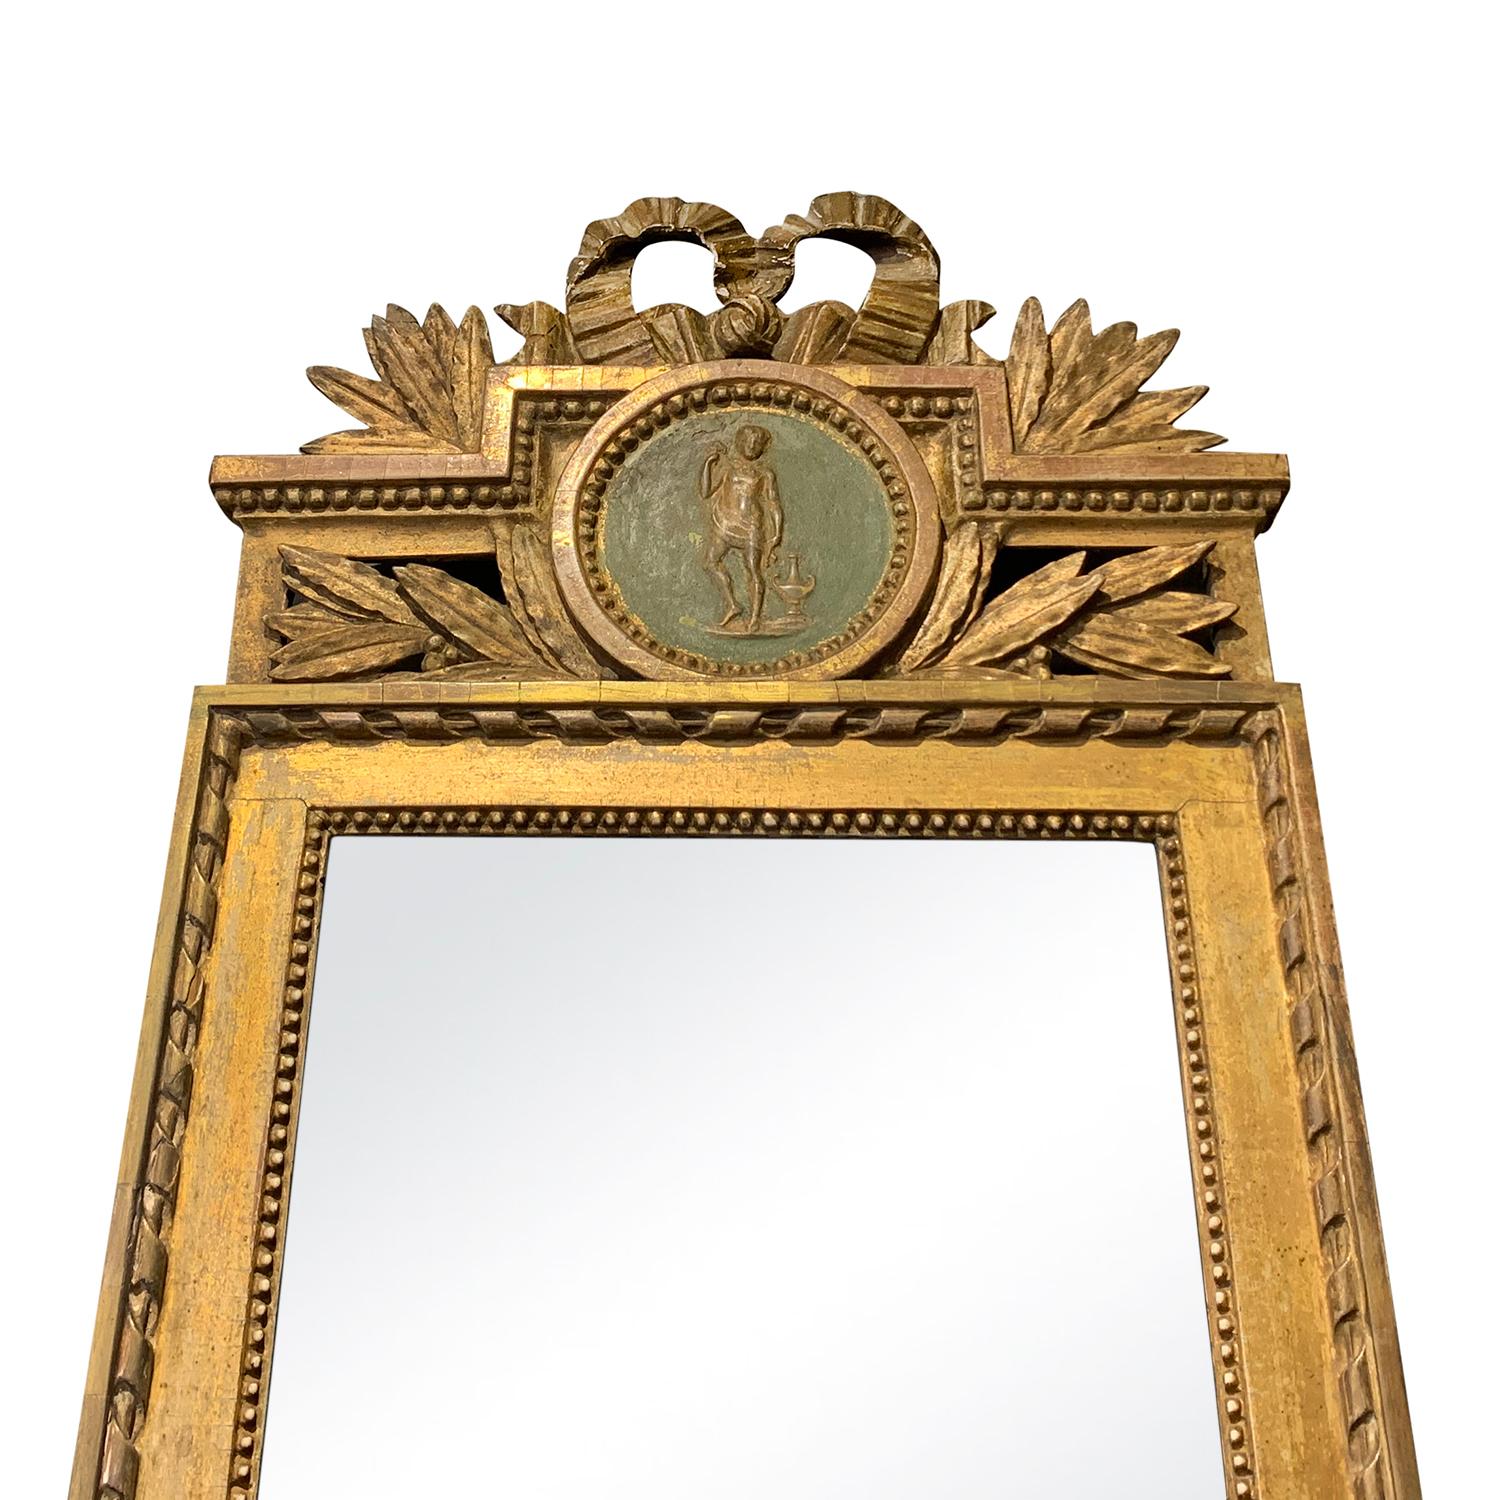 An 18th Century Swedish Gustavian mirror gilded with original glass. Richly hand carved antique wall mirror in the Gustavian style with medallion in good condition, enhanced by detailed wood carvings. Minor fading, scratches due to age. Wear